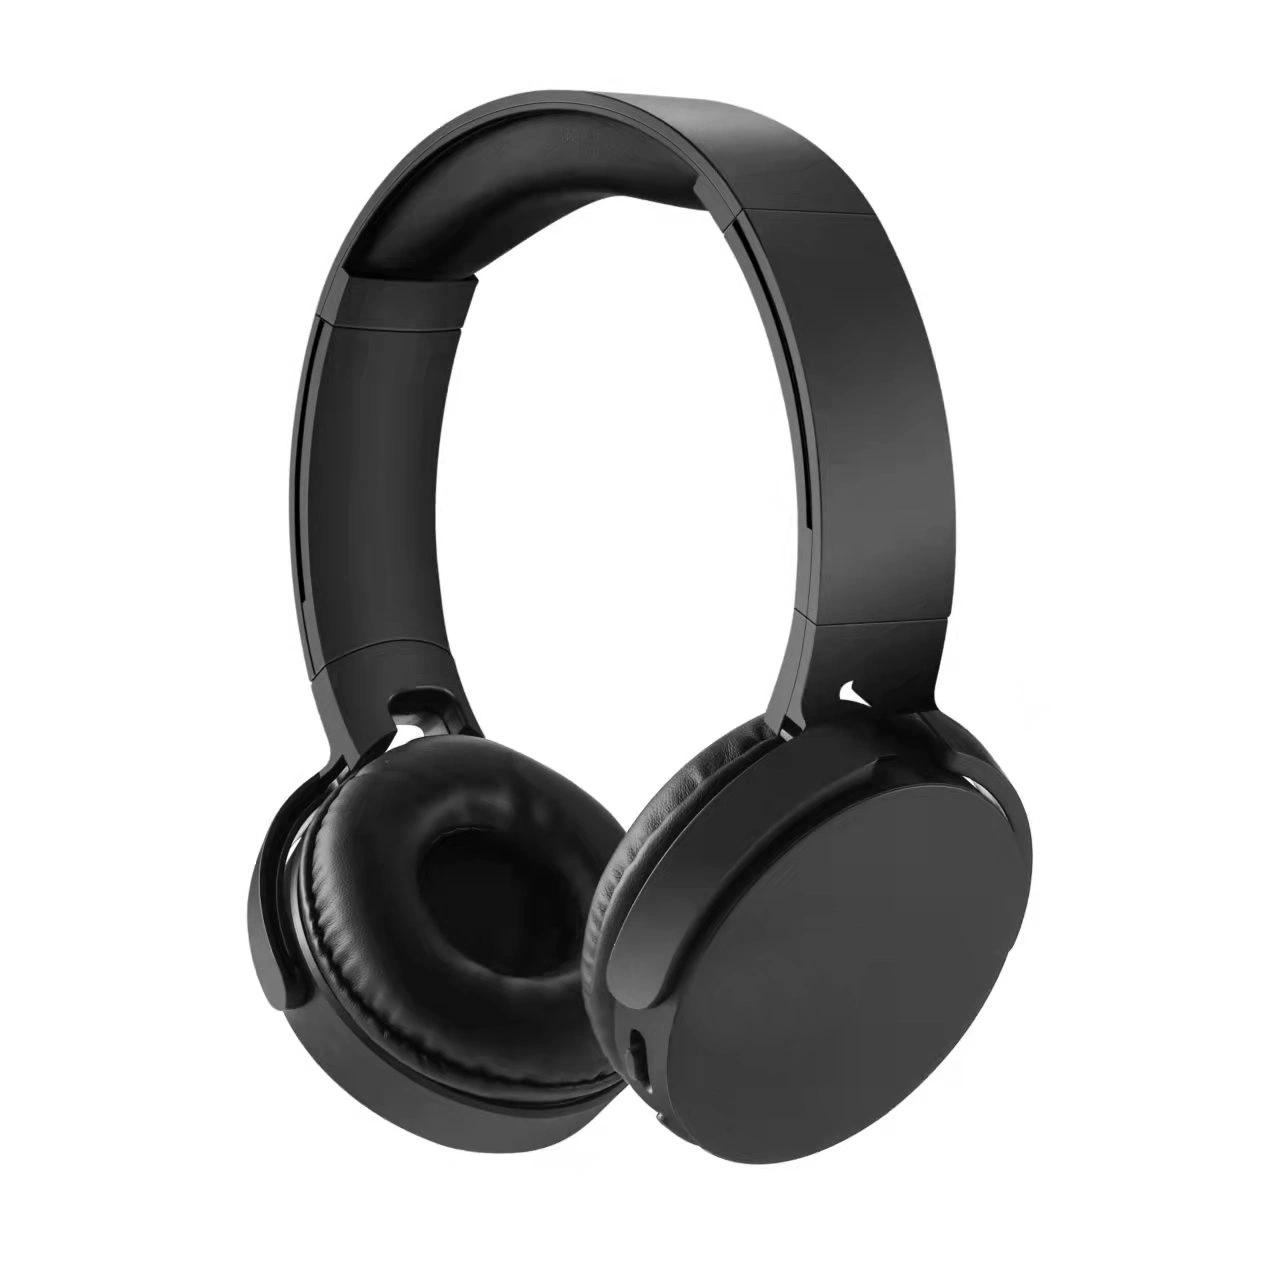 Comfortable Material CE and RoHS Wireless Headset on Ear Stereo Bluetooth Headphone Hands Free Microphone Mobile Phone Earphone Sport Sweatproof Earbuds